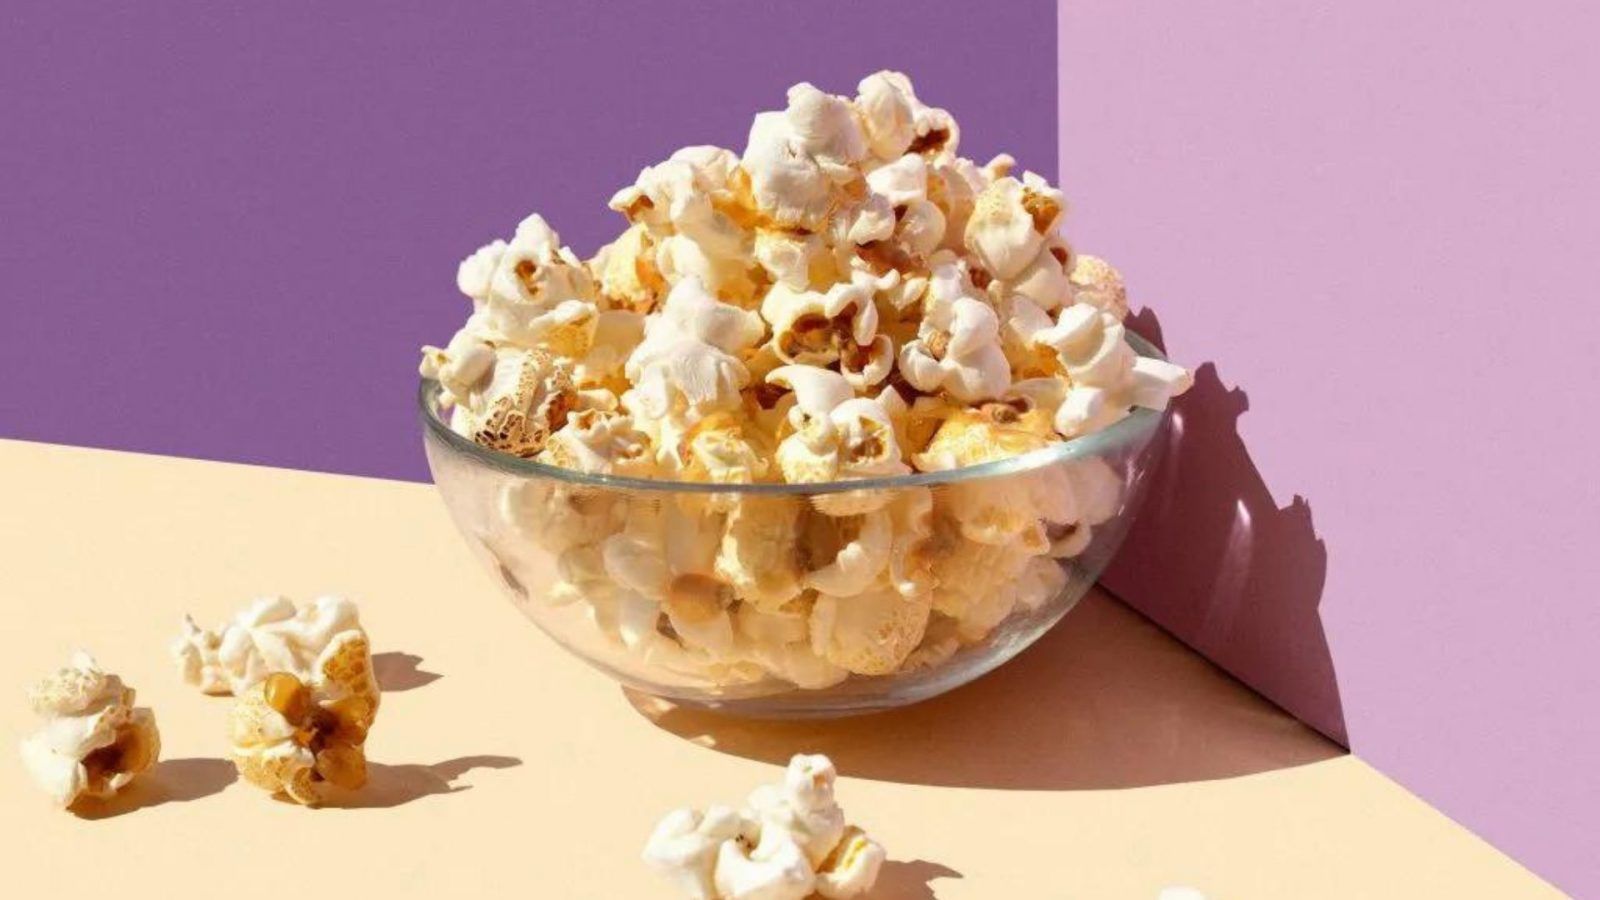 Is popcorn healthy? Here’s what dietitians think